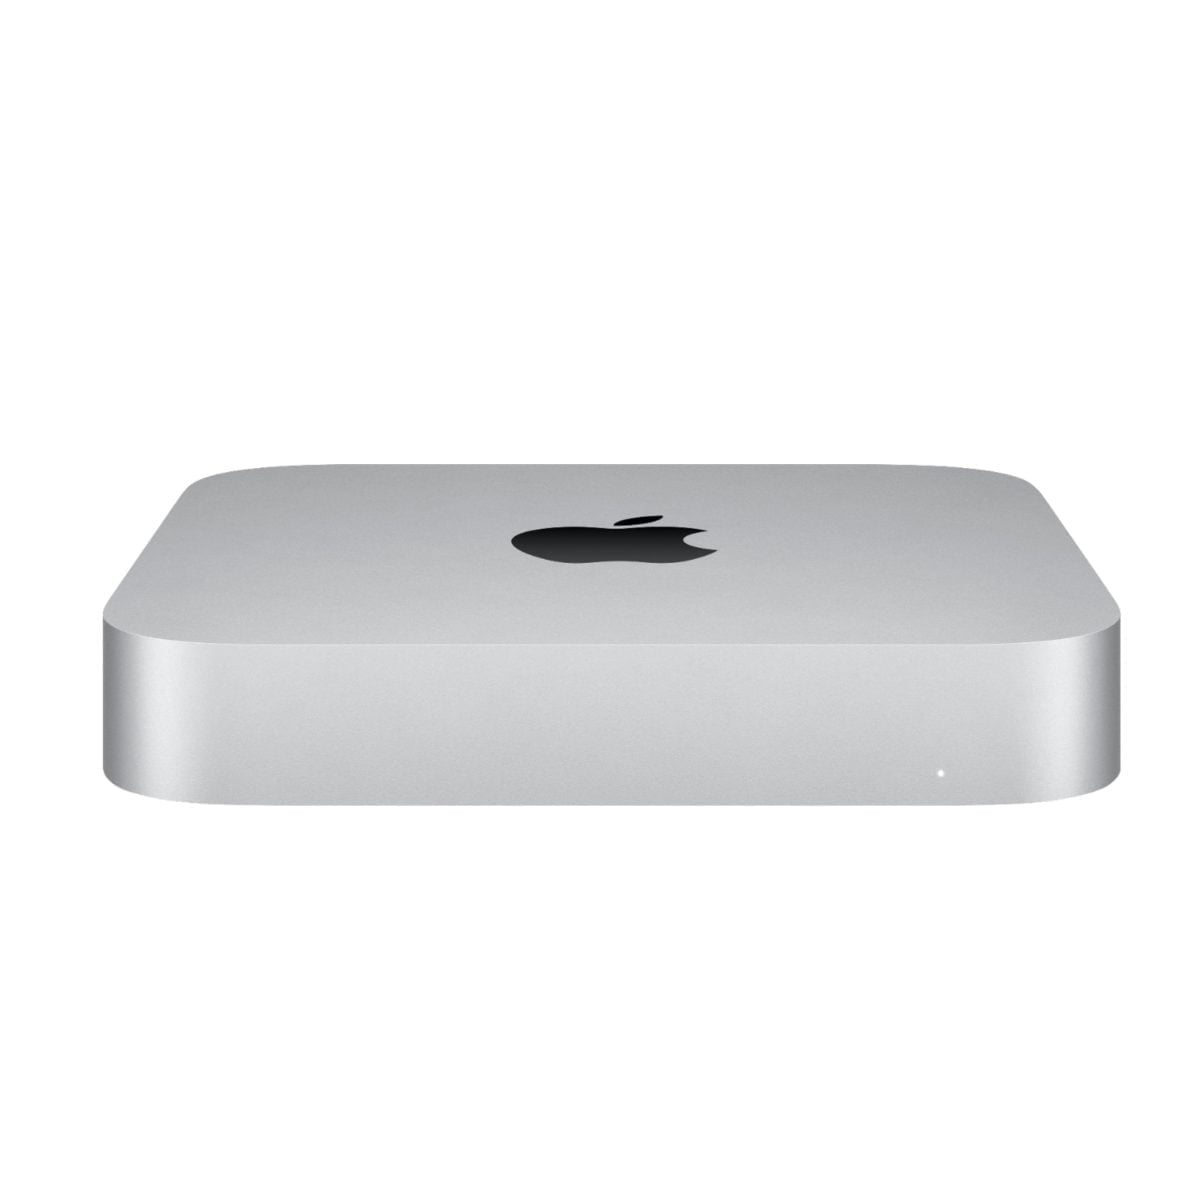 6427497 Sd Scaled Apple &Amp;Lt;H1 Class=&Amp;Quot;Heading-5 V-Fw-Regular&Amp;Quot;&Amp;Gt;Mac Mini Desktop - Apple M1 Chip - 8Gb Memory - 512 Gb Ssd (Latest Model) - Silver&Amp;Lt;/H1&Amp;Gt; Https://Www.youtube.com/Watch?V=3Oq__Scnyna Mac Mini, The Most Versatile, Do-It-All Mac Desktop, To A Whole New Level Of Performance. With Up To 3X Faster Cpu Performance, Up To 6X Faster Graphics, A Powerful Neural Engine With Up To 15X Faster Machine Learning, And Superfast Unified Memory — All In An Ultracompact Design.so You Can Create, Work, And Play On Mac Mini With Speed And Power Beyond Anything You Ever Imagined. Mac Mini Mac Mini Desktop - Apple M1 Chip - 8Gb Memory - 512 Gb Ssd - Mgnt3